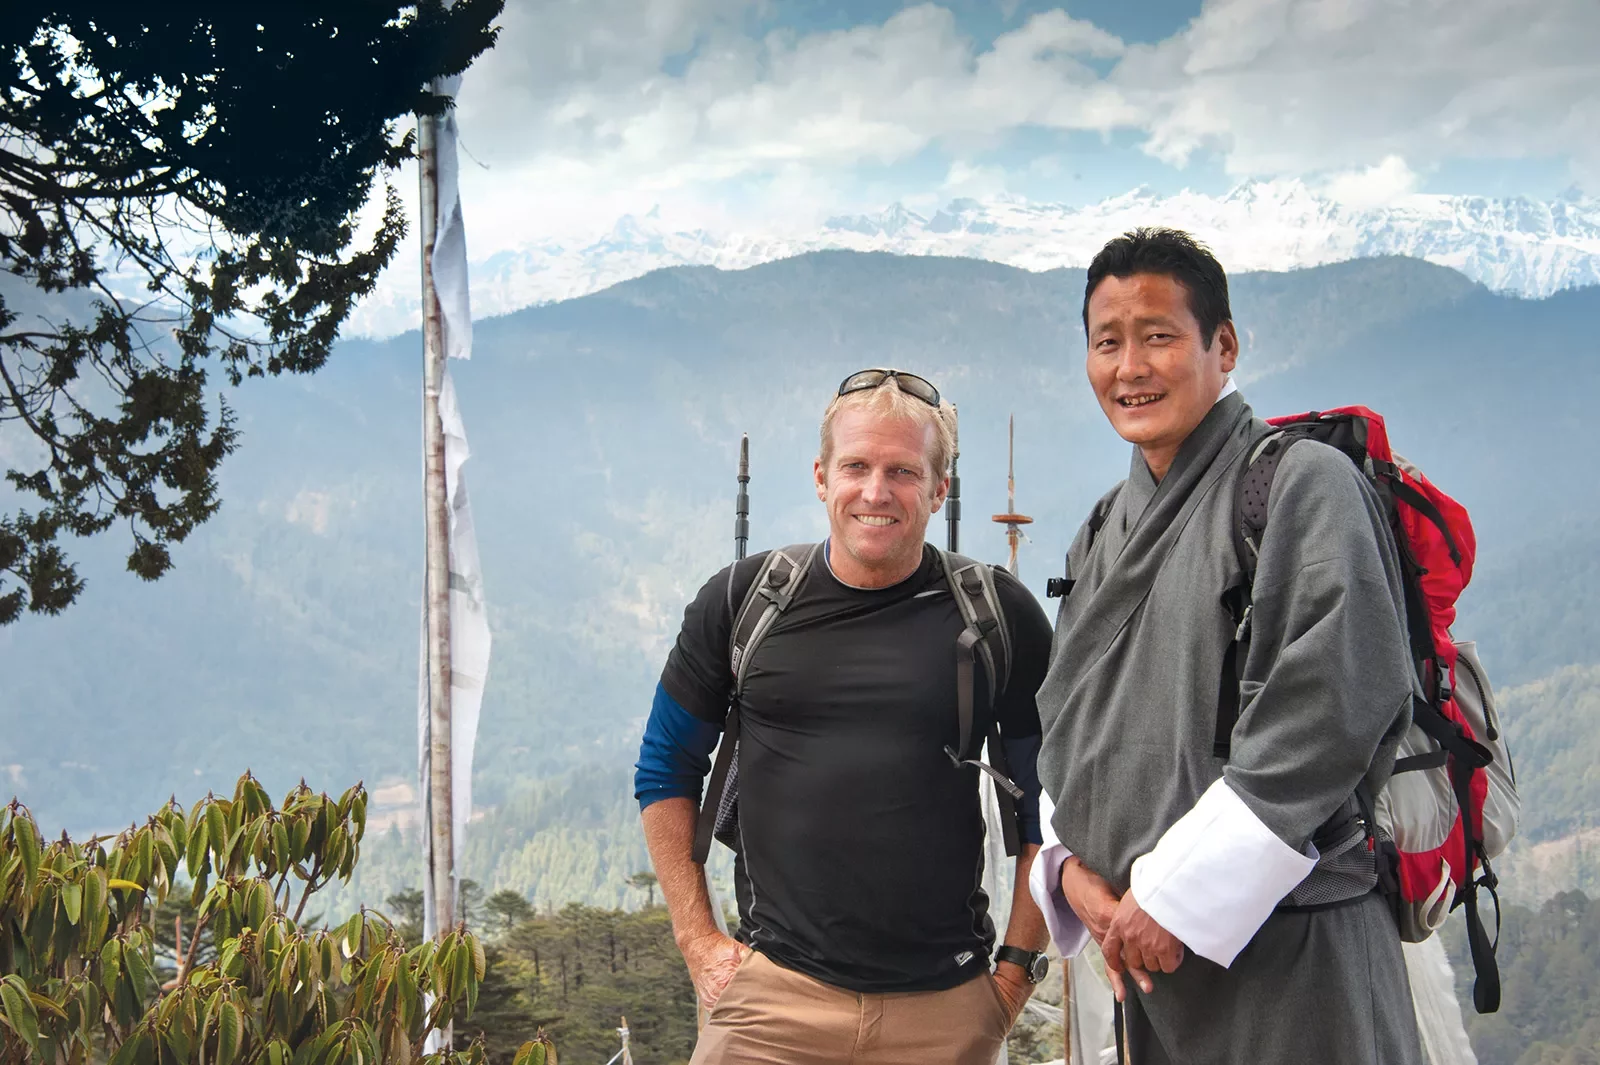 Hiker posing with a local guide in the mountains of Bhutan